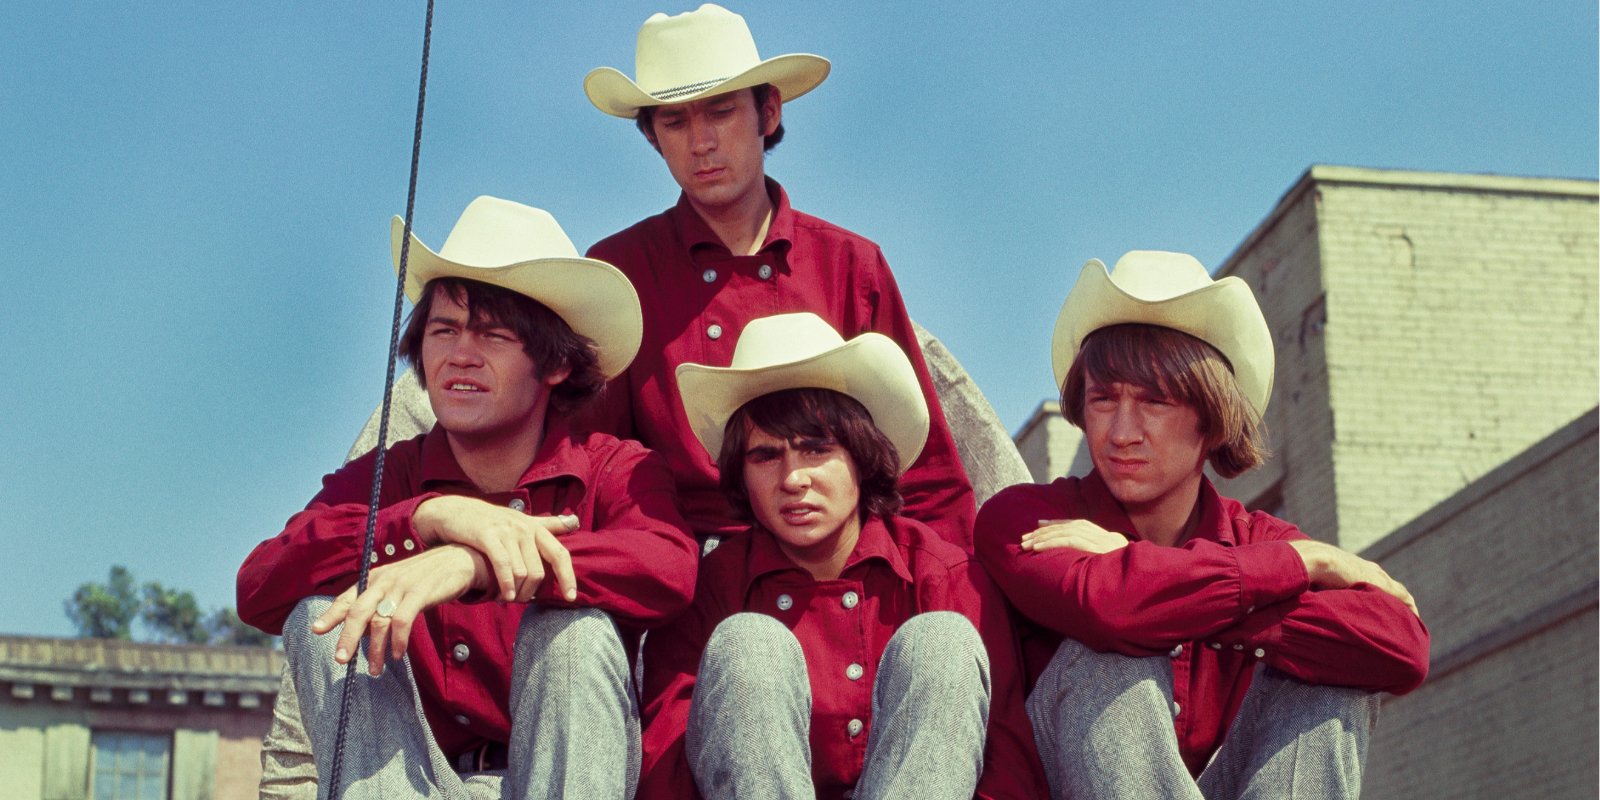 Mike Nesmith Admits The Monkees Were Initially 'Disastrous' and 'Couldn't Work Together' as a Musical Group